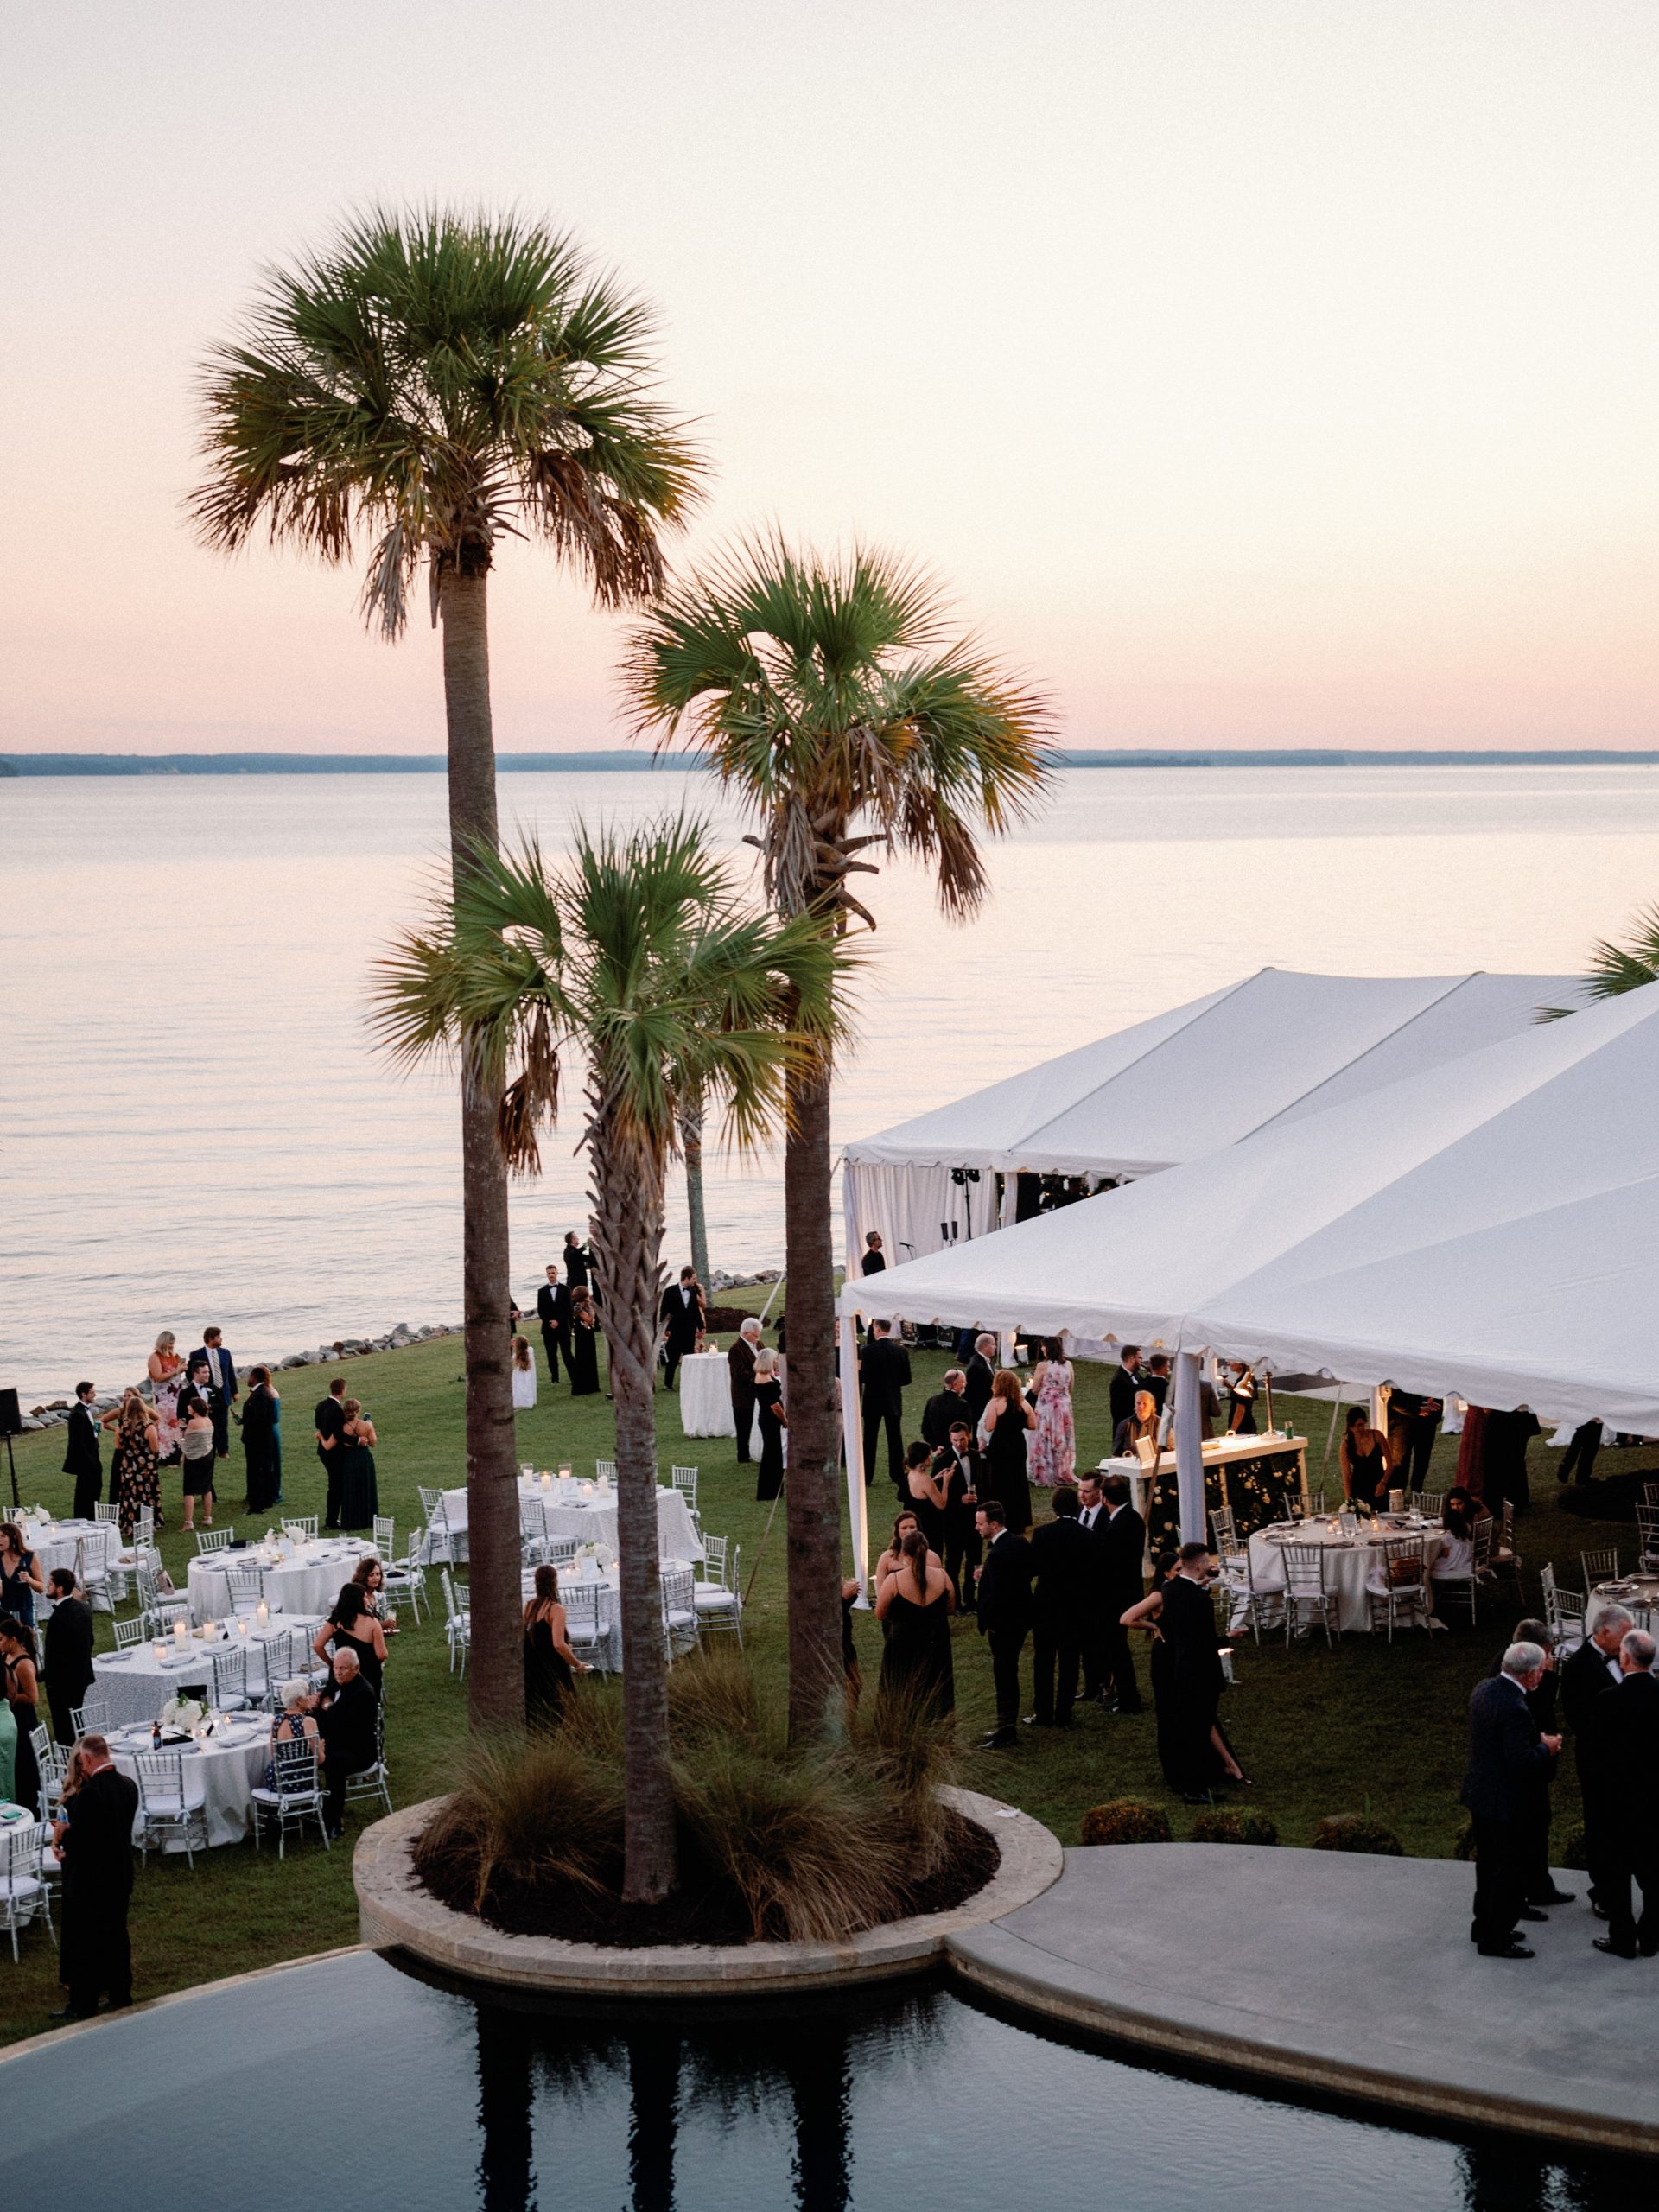 Jordan insisted upon having seating for every guest, and white roses and candles graced each table. Lakeside tents were magical with lush bouquets hanging from the chandeliers over the dance floor.
